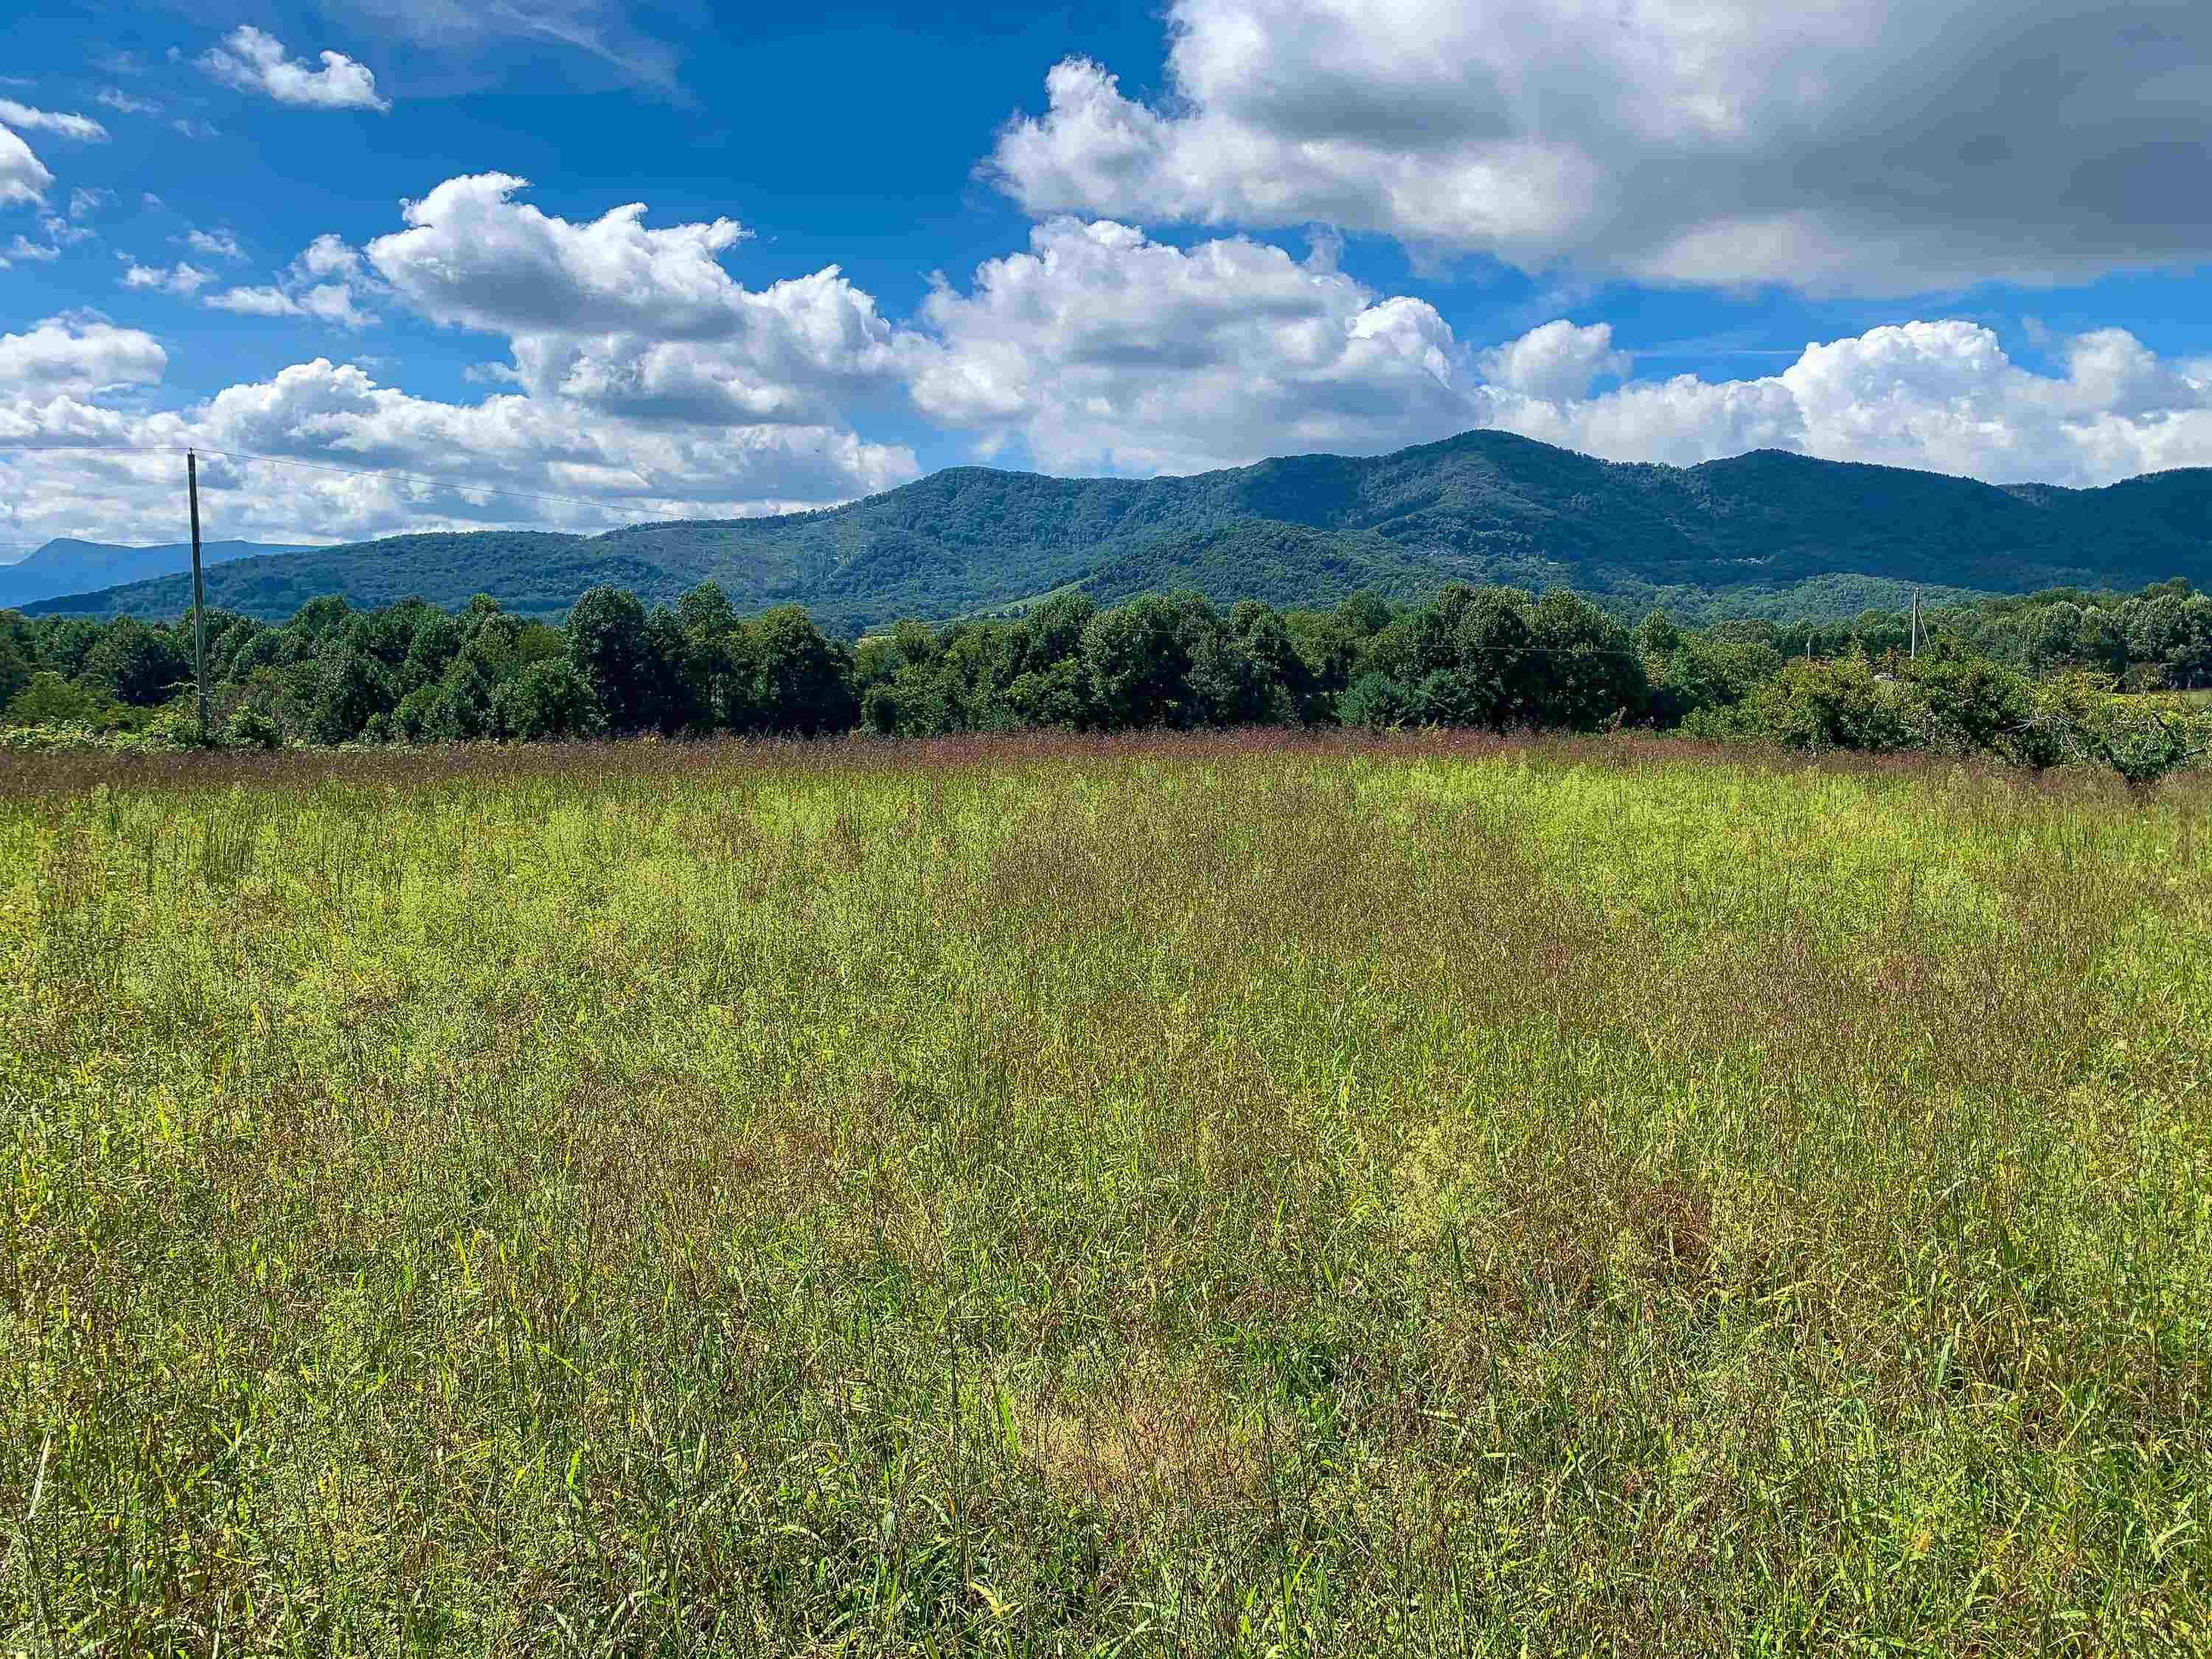 Excellent piece of land with gorgeous mountain views! Have a look at this very usable lot, a great place for your new home. A 0.69 acre tract, level and already cleared to make developing much easier. The property has a power pole and line that runs alongside the road. A few restrictions on the property include no singlewides or junk yards, but call for more details. Doublewides are allowed! Views of Fisher's peak and other blue ridge mountains are in your direct view. Apple Orchards and fields of sunflowers are your neighbors. The property is in a great location. Less than 20 minutes to Mt Airy, 12 minutes to Fancy Gap, and within close proximity to many other towns and attractions. Don't miss out on this great property for your future home!